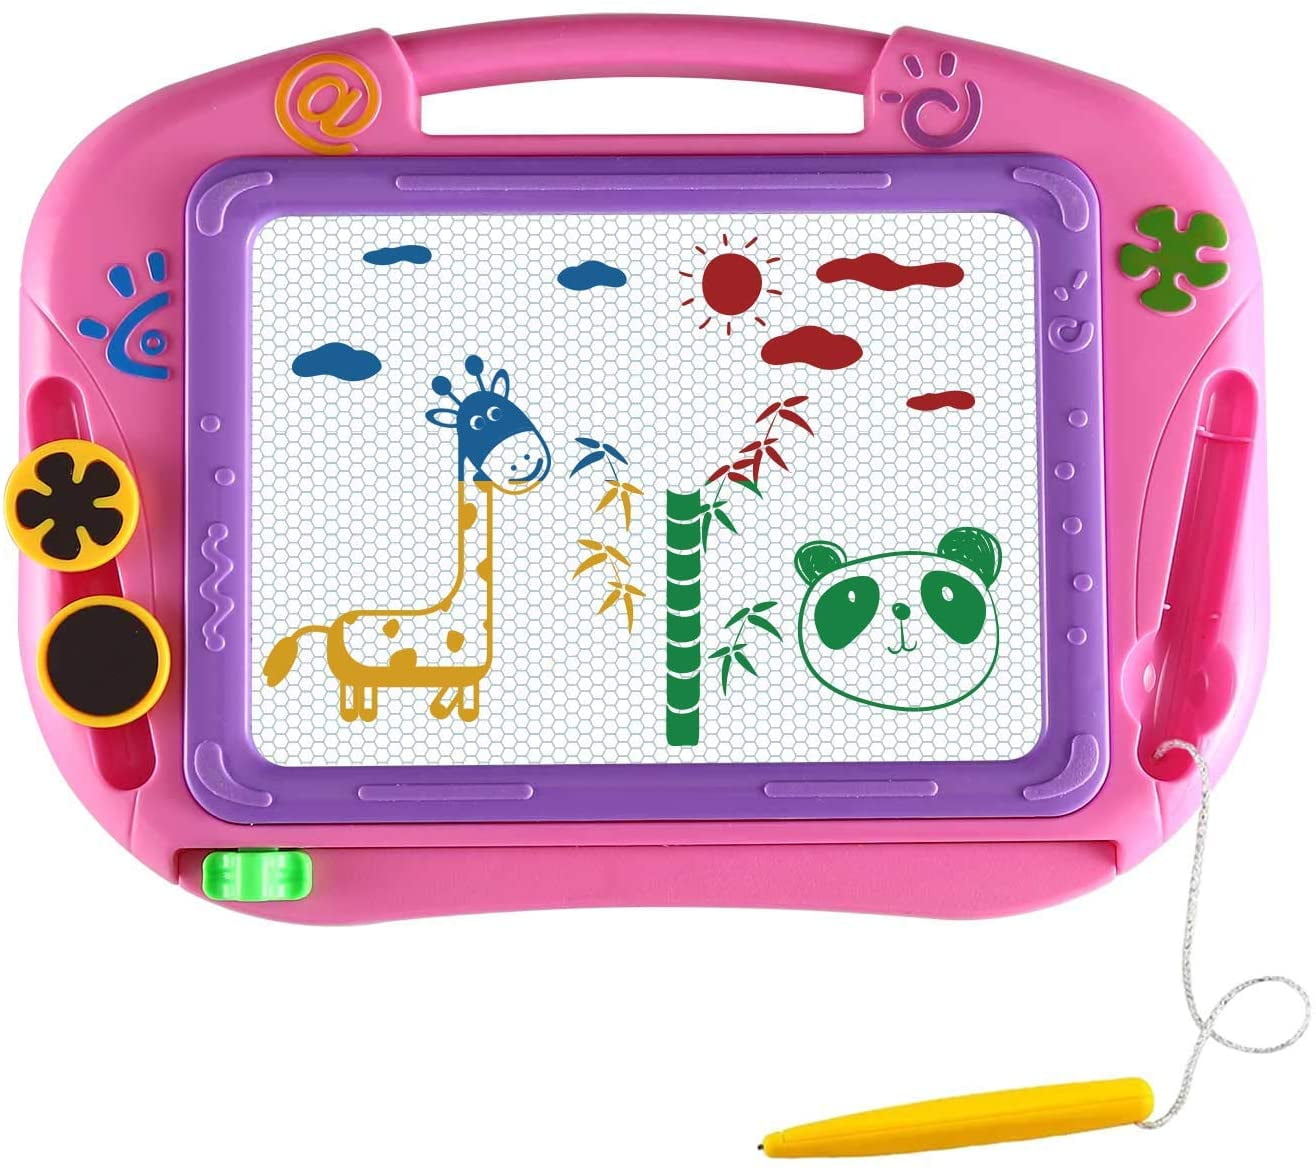 Doodle Board Writing Painting Pad Comes with a 4-Color pozzolanas Magnetic Drawing Board for Kids and Toddlers Travel Game Birthday Present for Toddler 